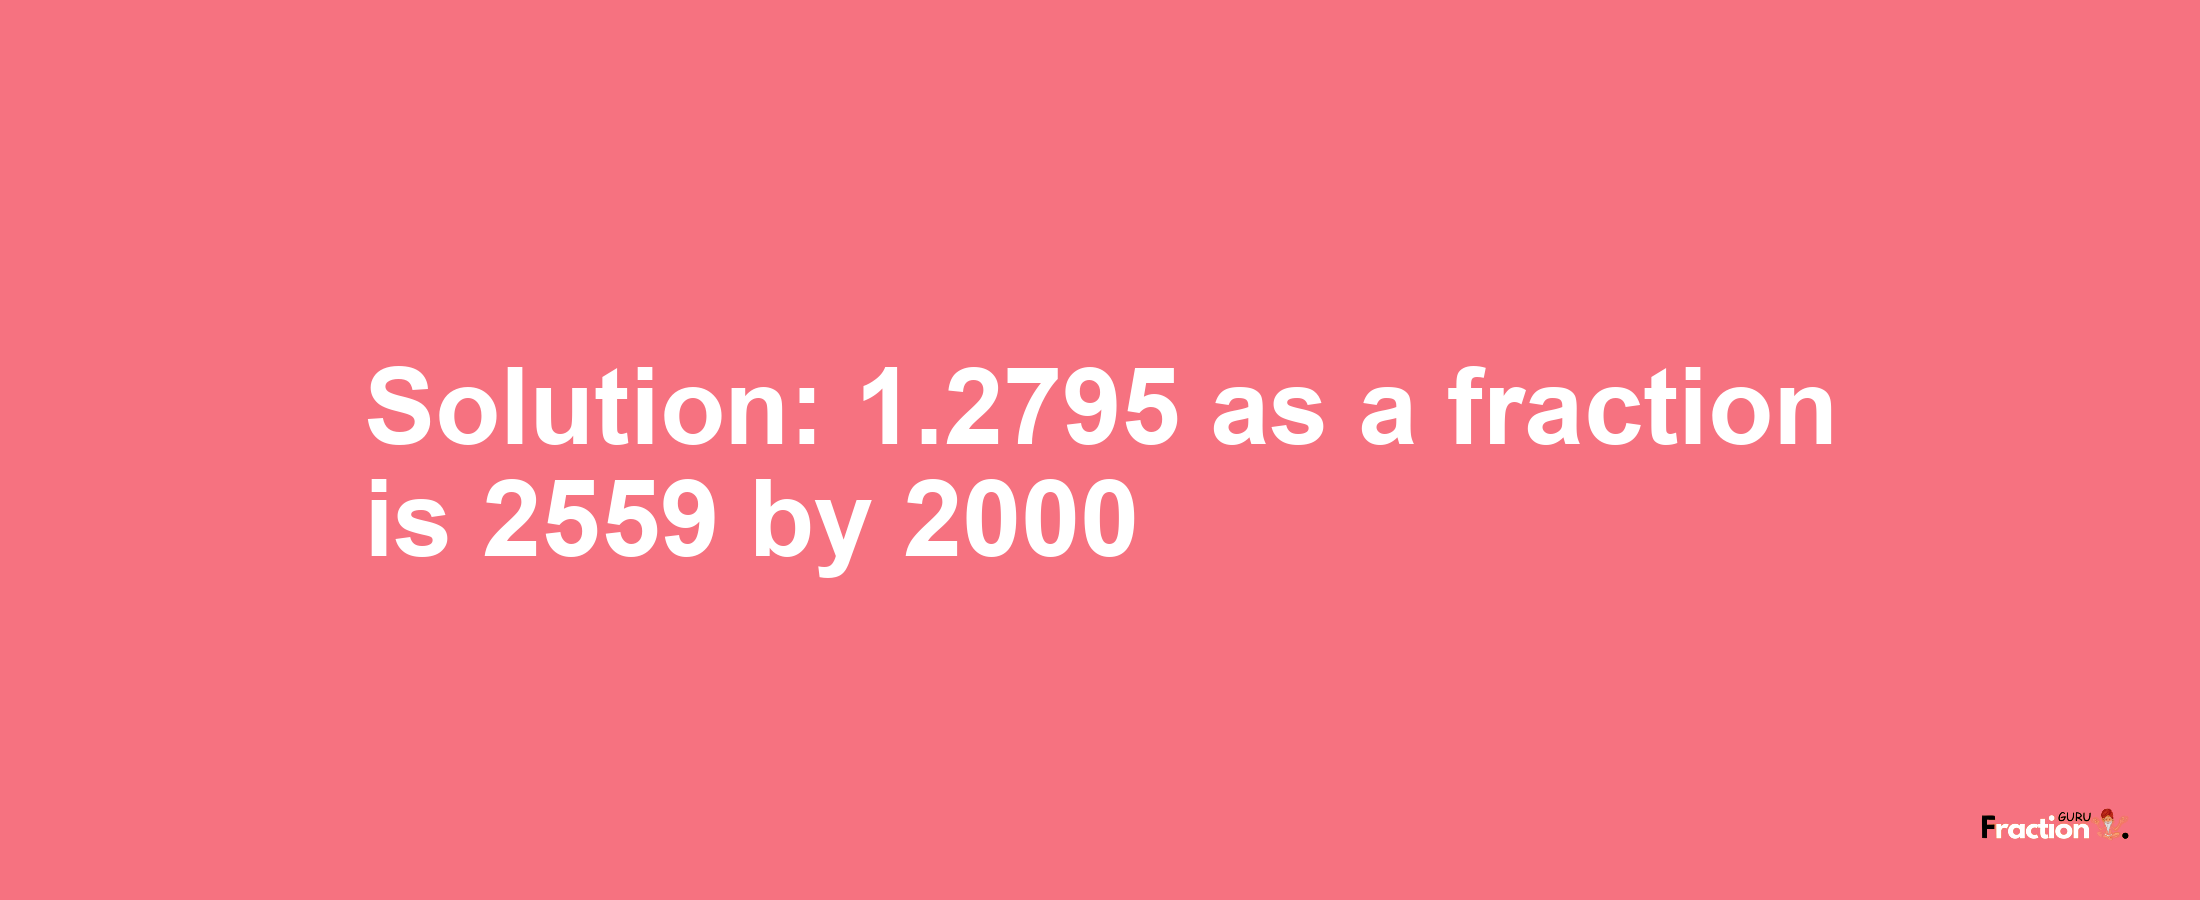 Solution:1.2795 as a fraction is 2559/2000